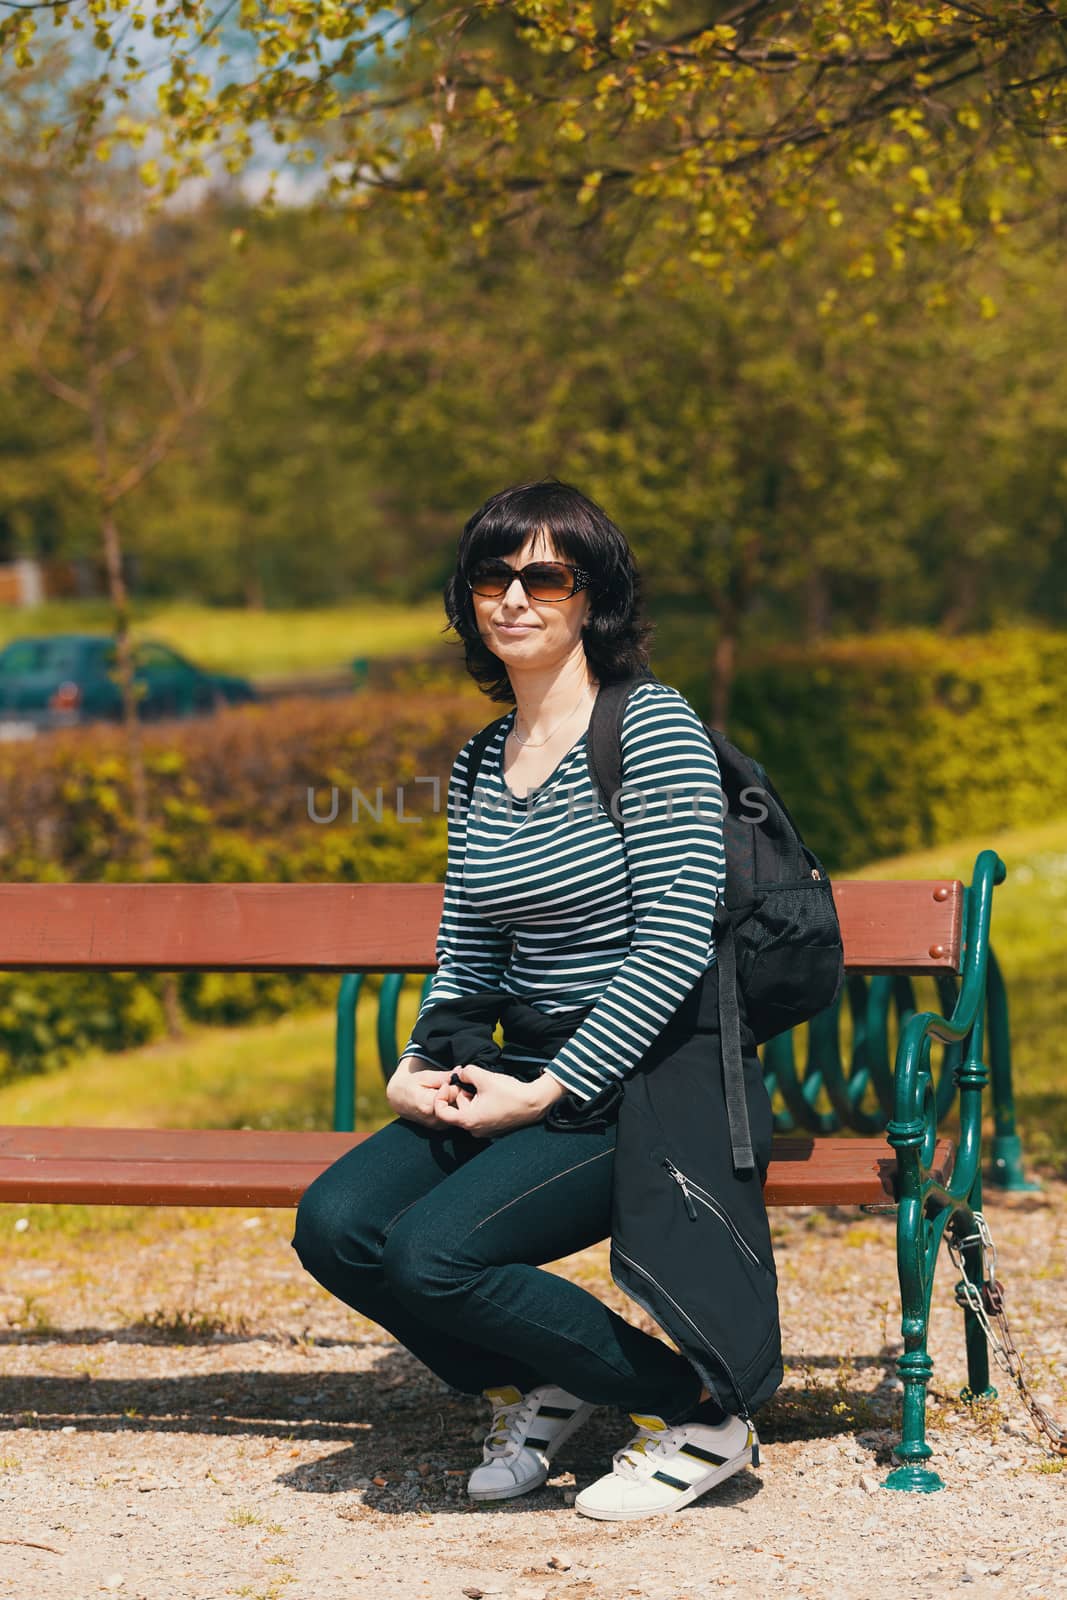 tired Middle age woman with sunglasses resting on bench